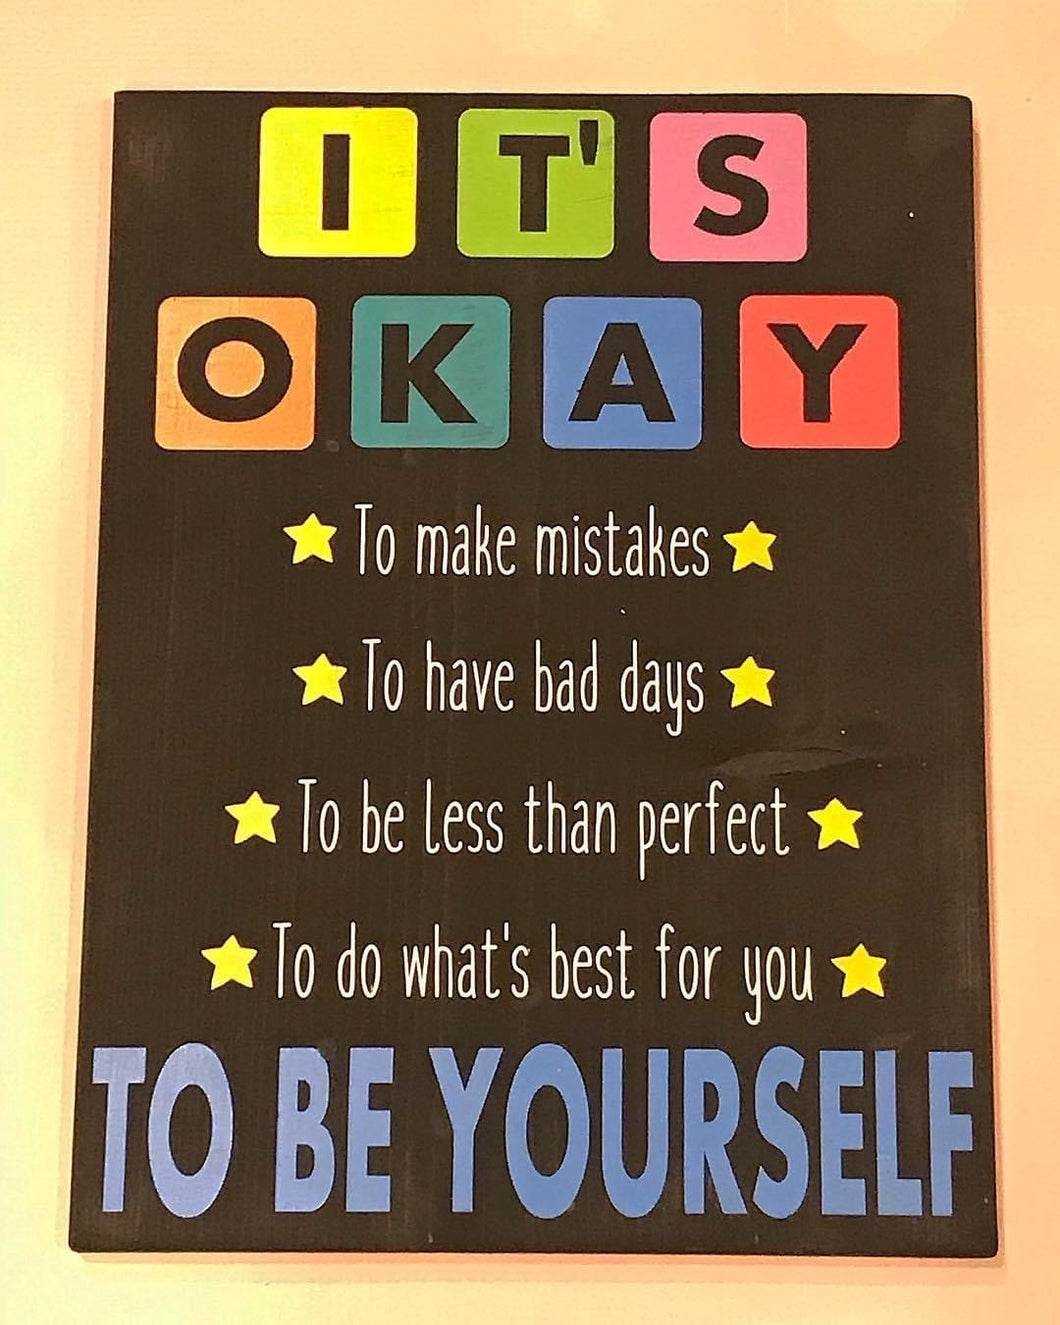 It’s Okay to Be Yourself